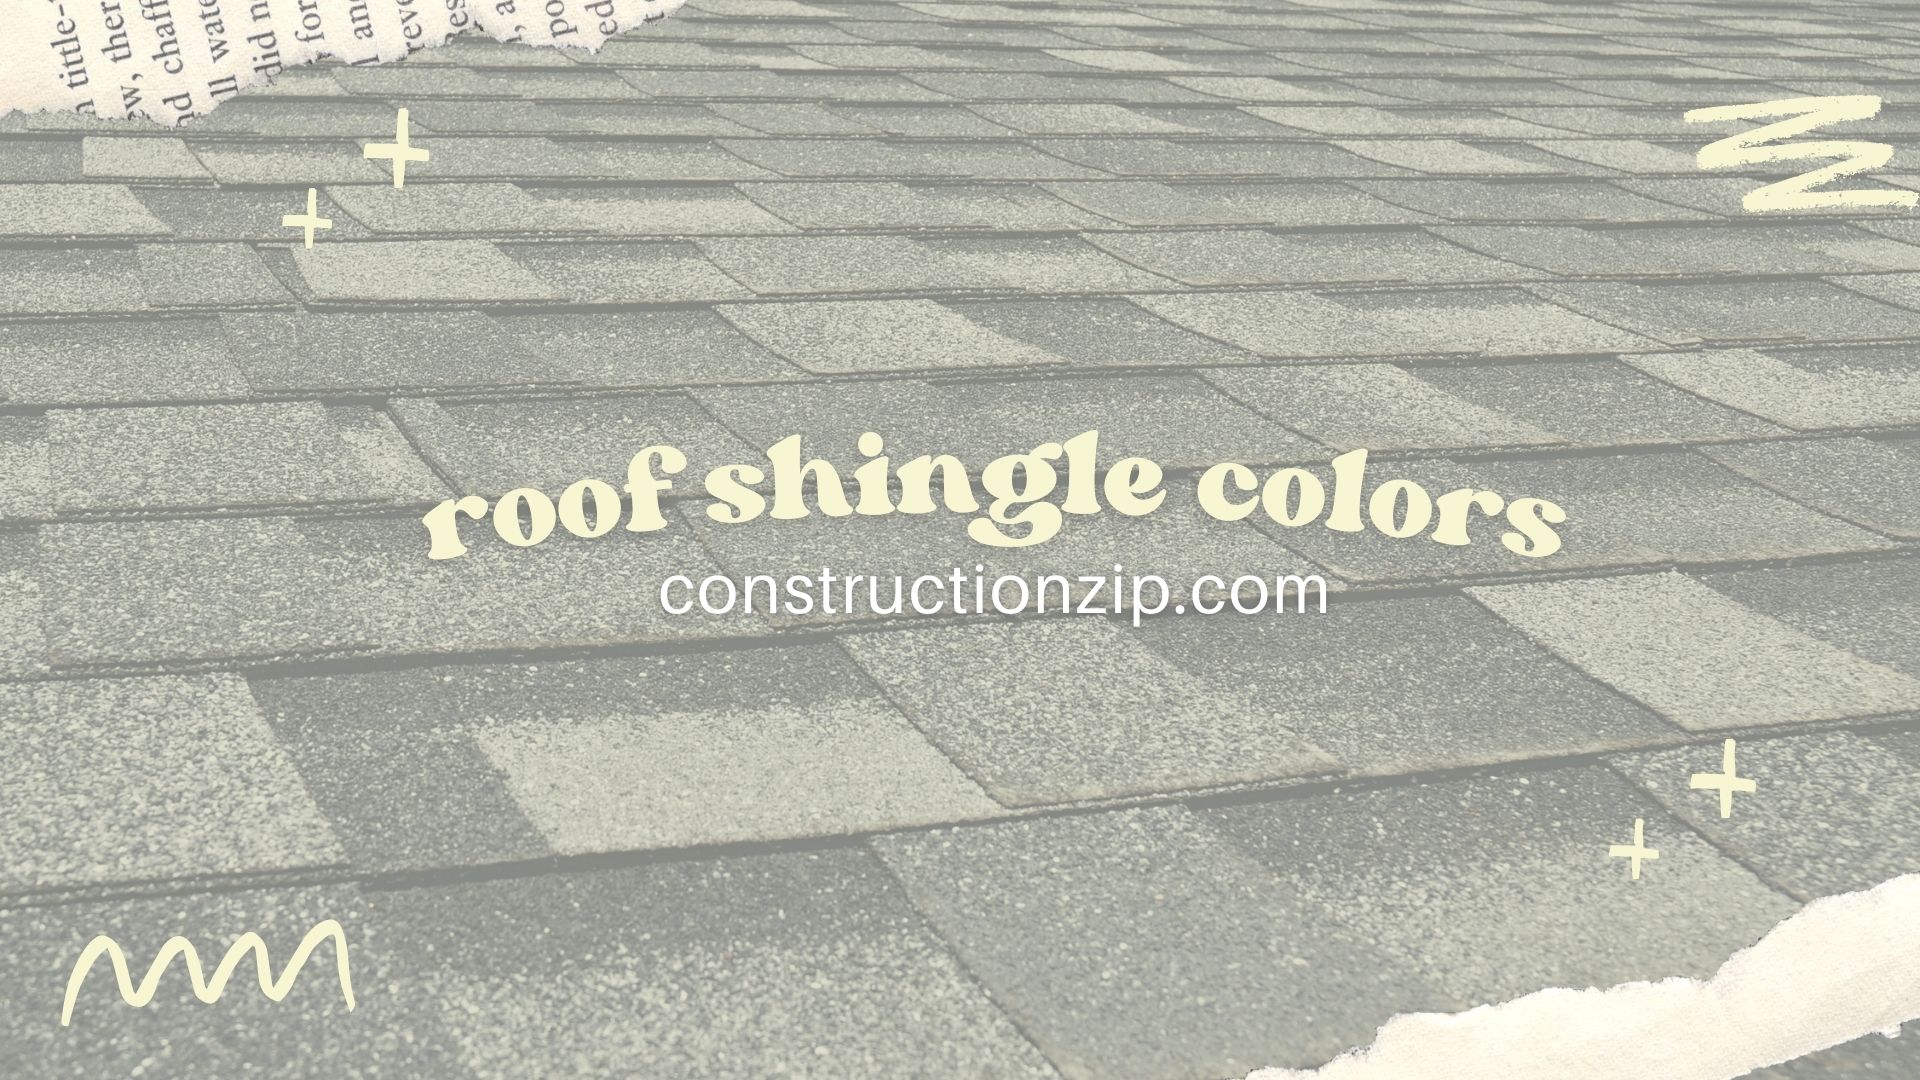 What is the most popular shingle color?